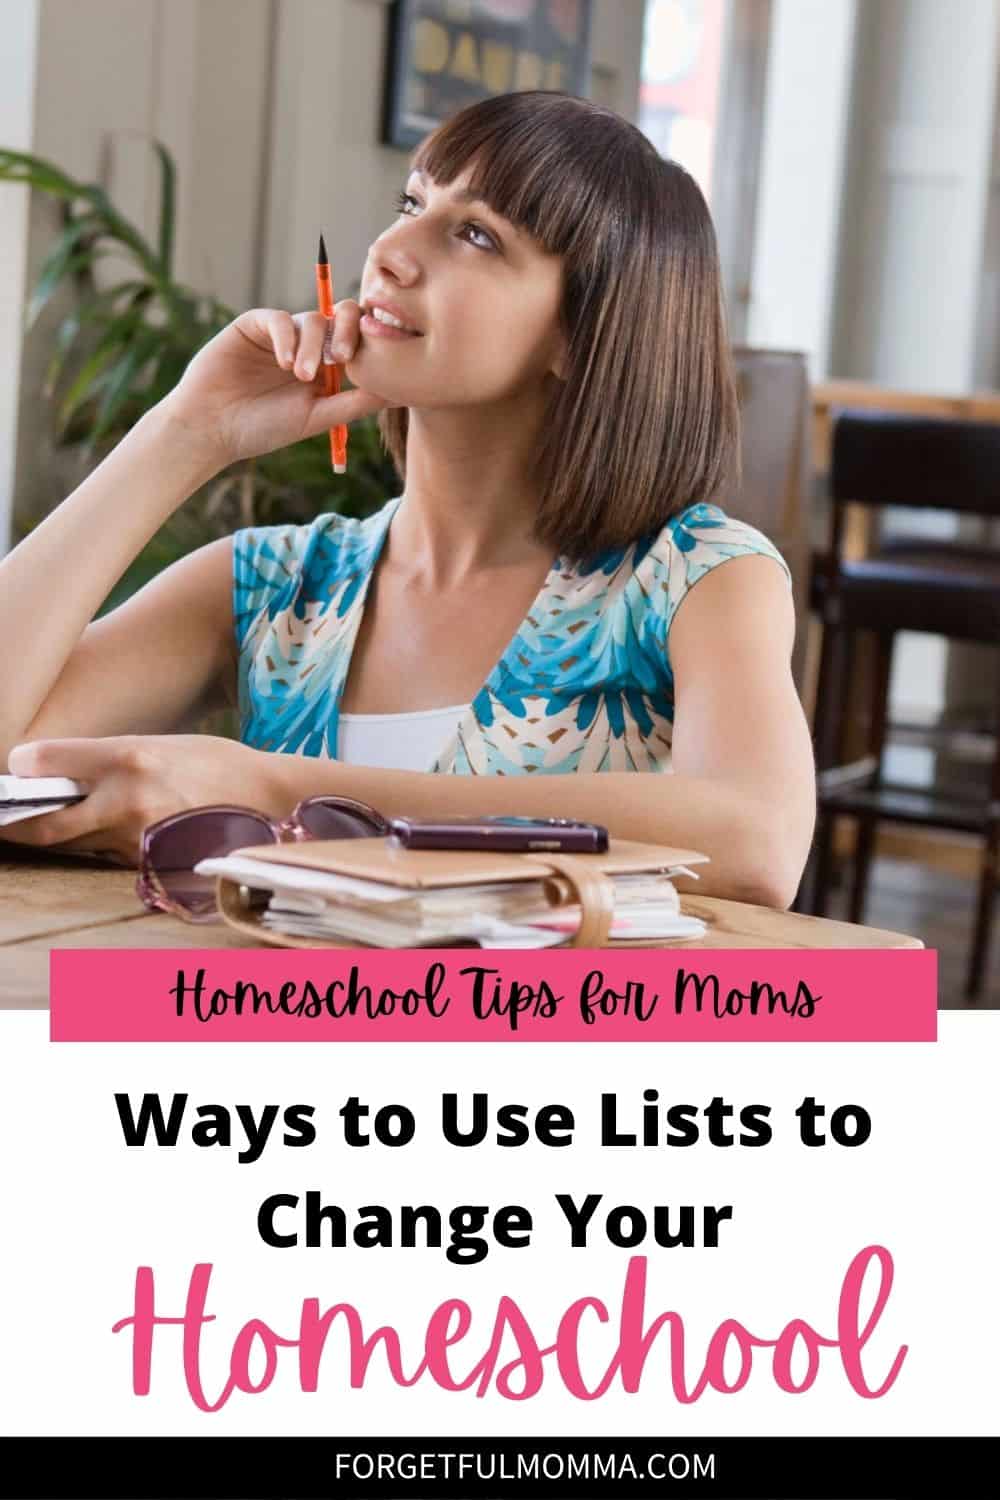 5 Lists for Your Homeschool That will Change It